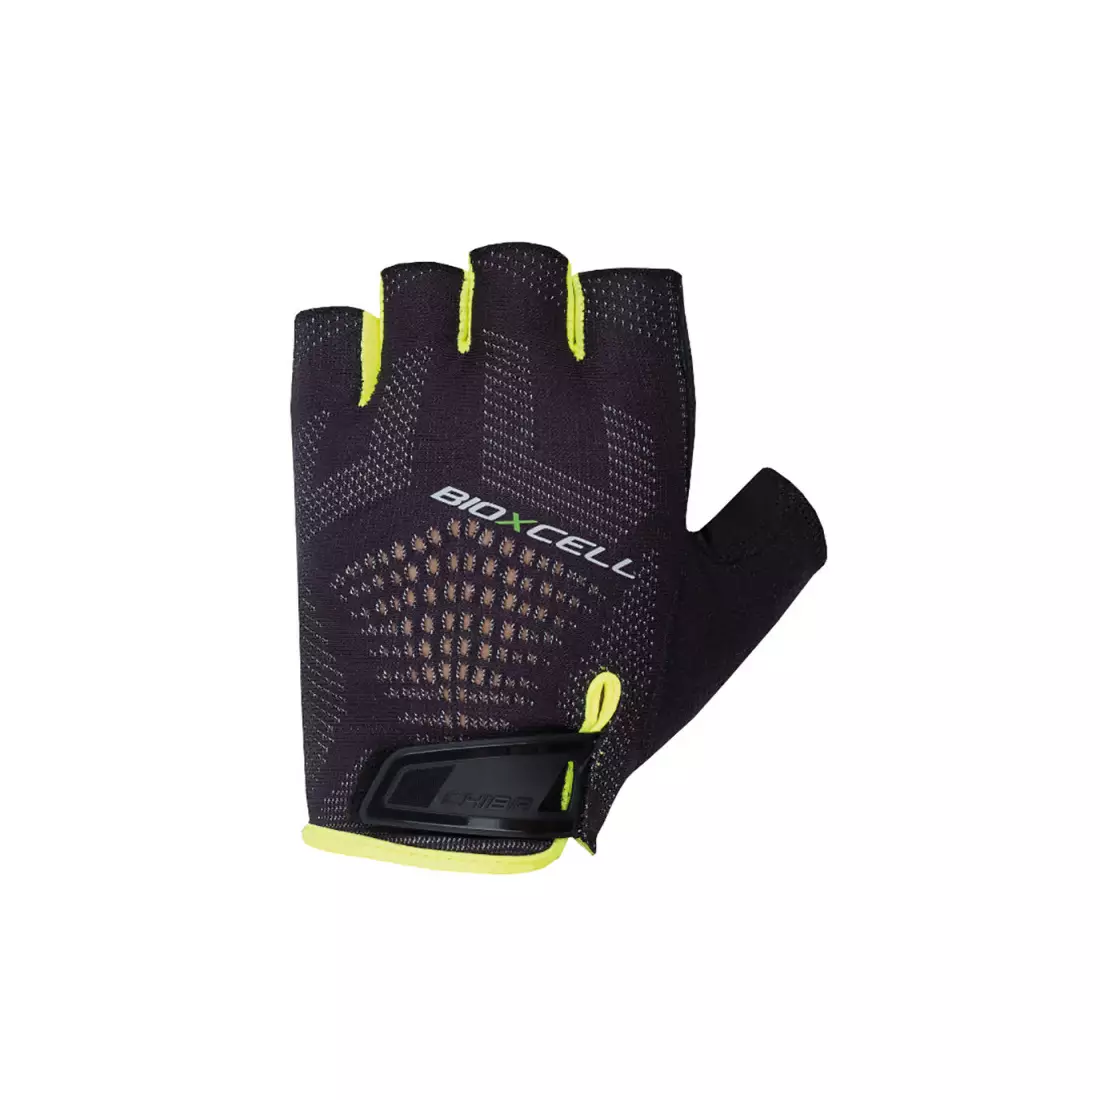 CHIBA BIOXCELL SUPER FLY cycling gloves black / fluor 3060318